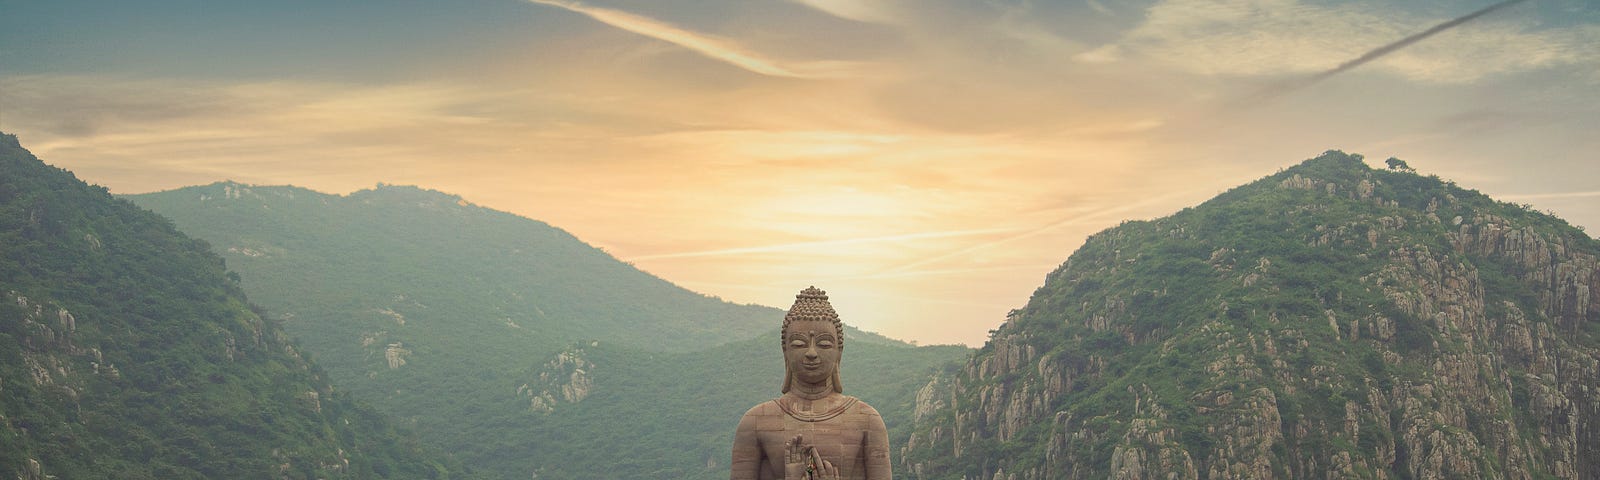 Embracing Compassion: The Universal Appeal of Buddhism